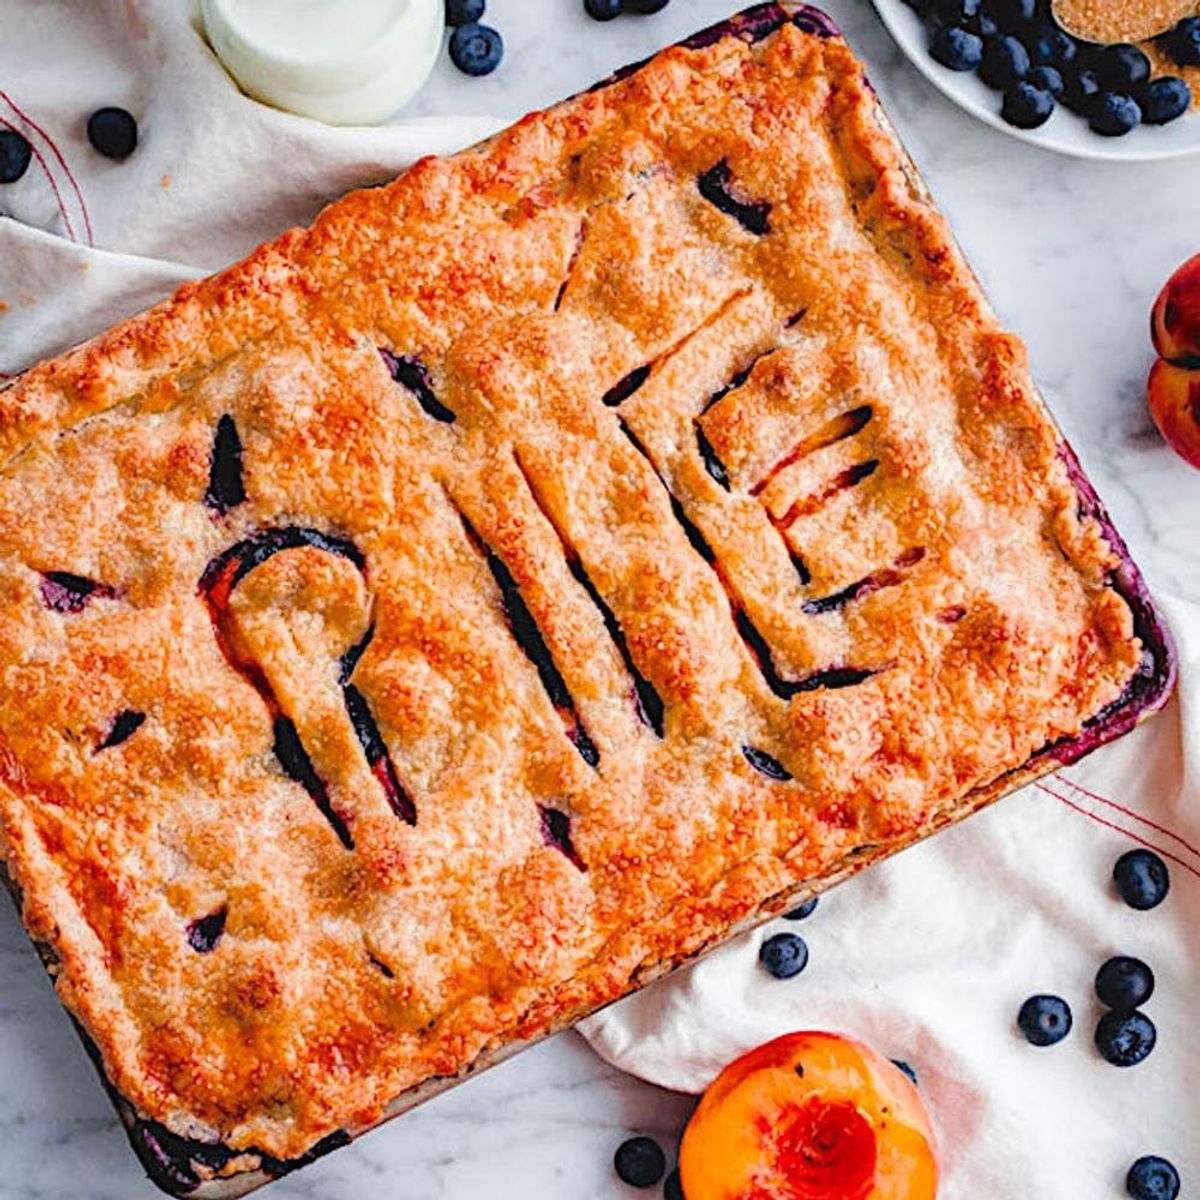 14 Fruity Slab Pies That’ll Feed an Army at Your Next Cookout